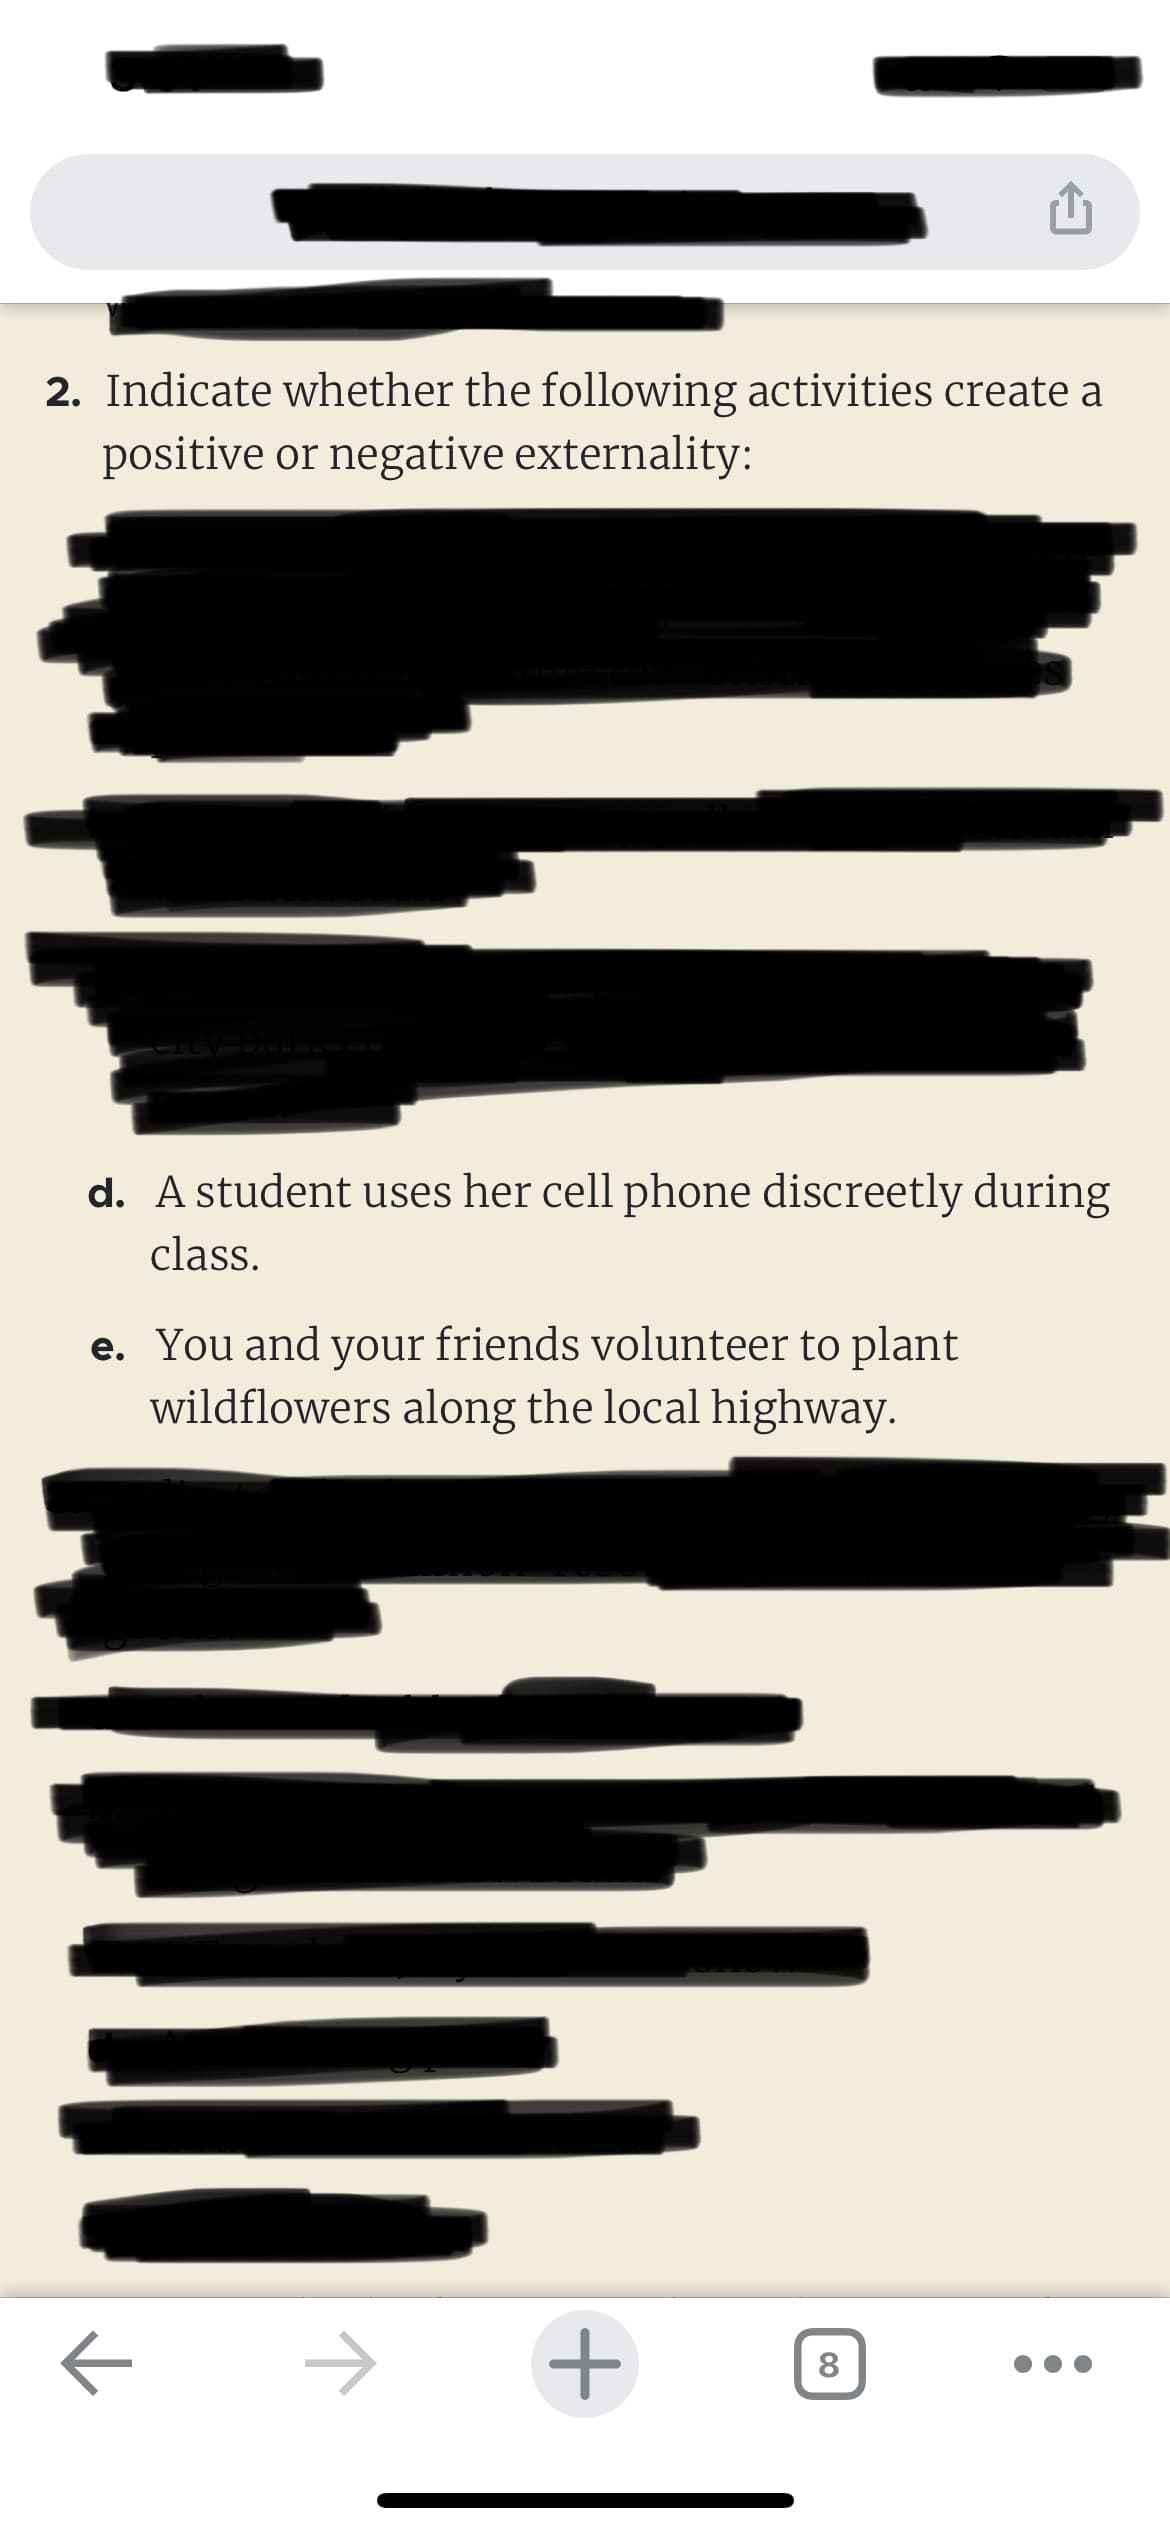 2. Indicate whether the following activities create a
positive or negative externality:
d. A student uses her cell phone discreetly during
class.
e. You and your friends volunteer to plant
wildflowers along the local highway.
←
→ +
8